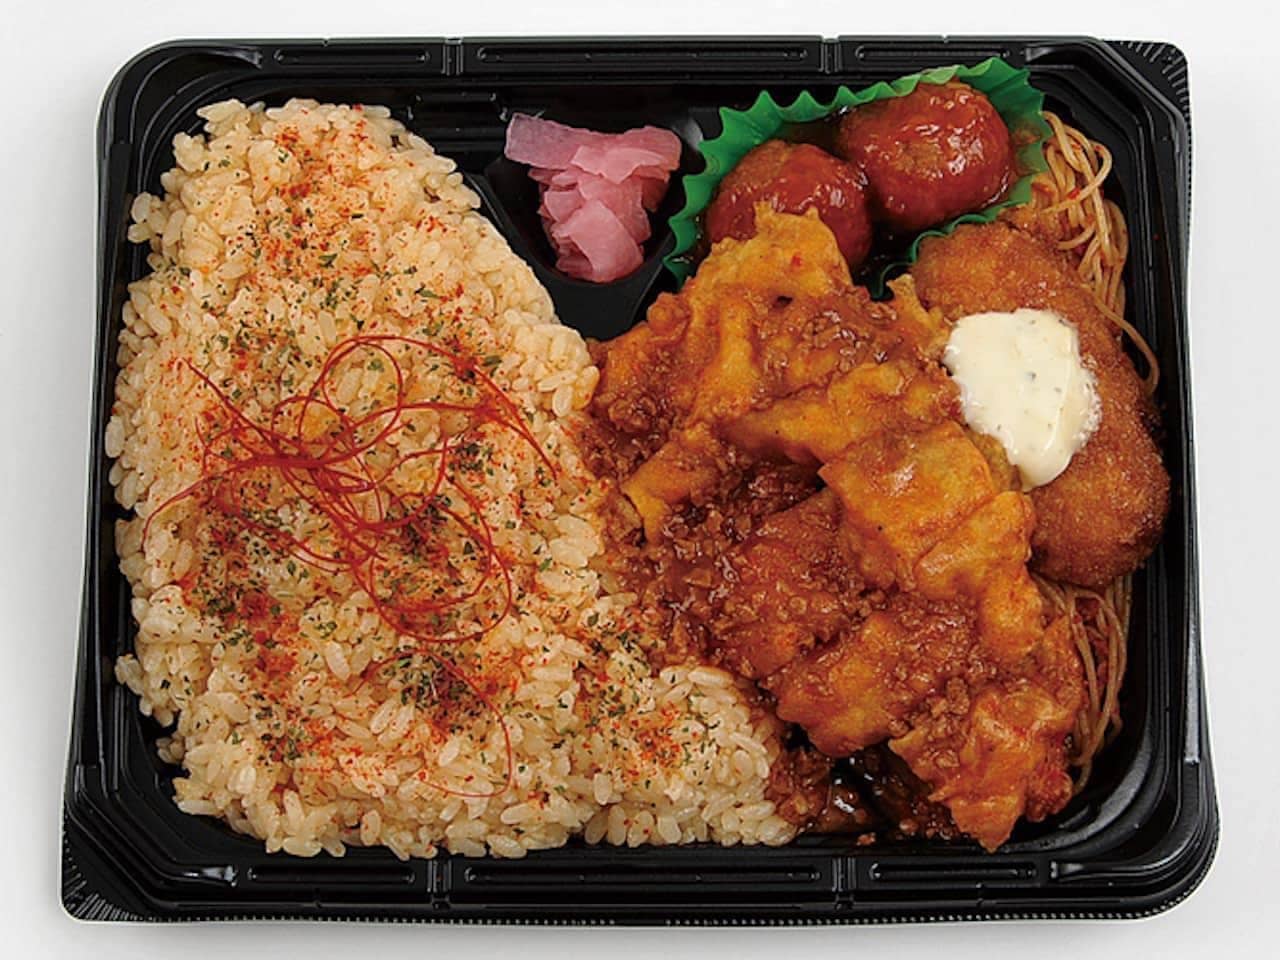 Sichuan Style Spicy Cibi Chicken Bento from Ministop Szechuan-Style Spicy Chicken Lunchbox" from Ministop